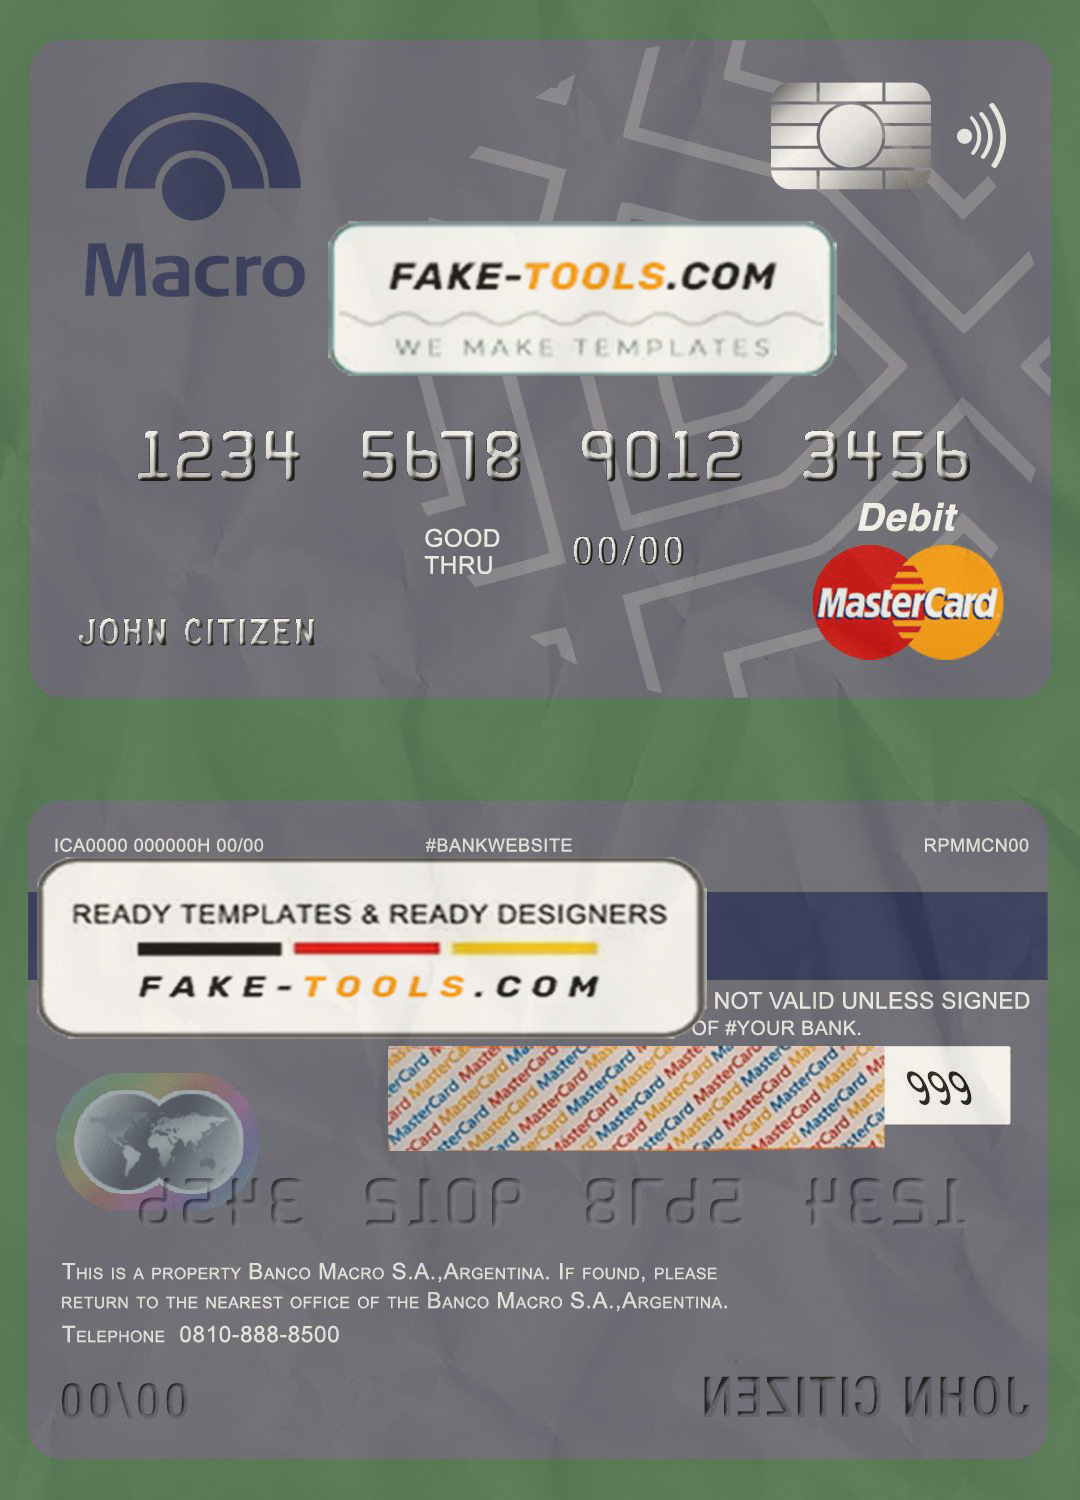 Argentina Banco Macro S.A. bank mastercard debit card template in PSD format, fully editable scan effect